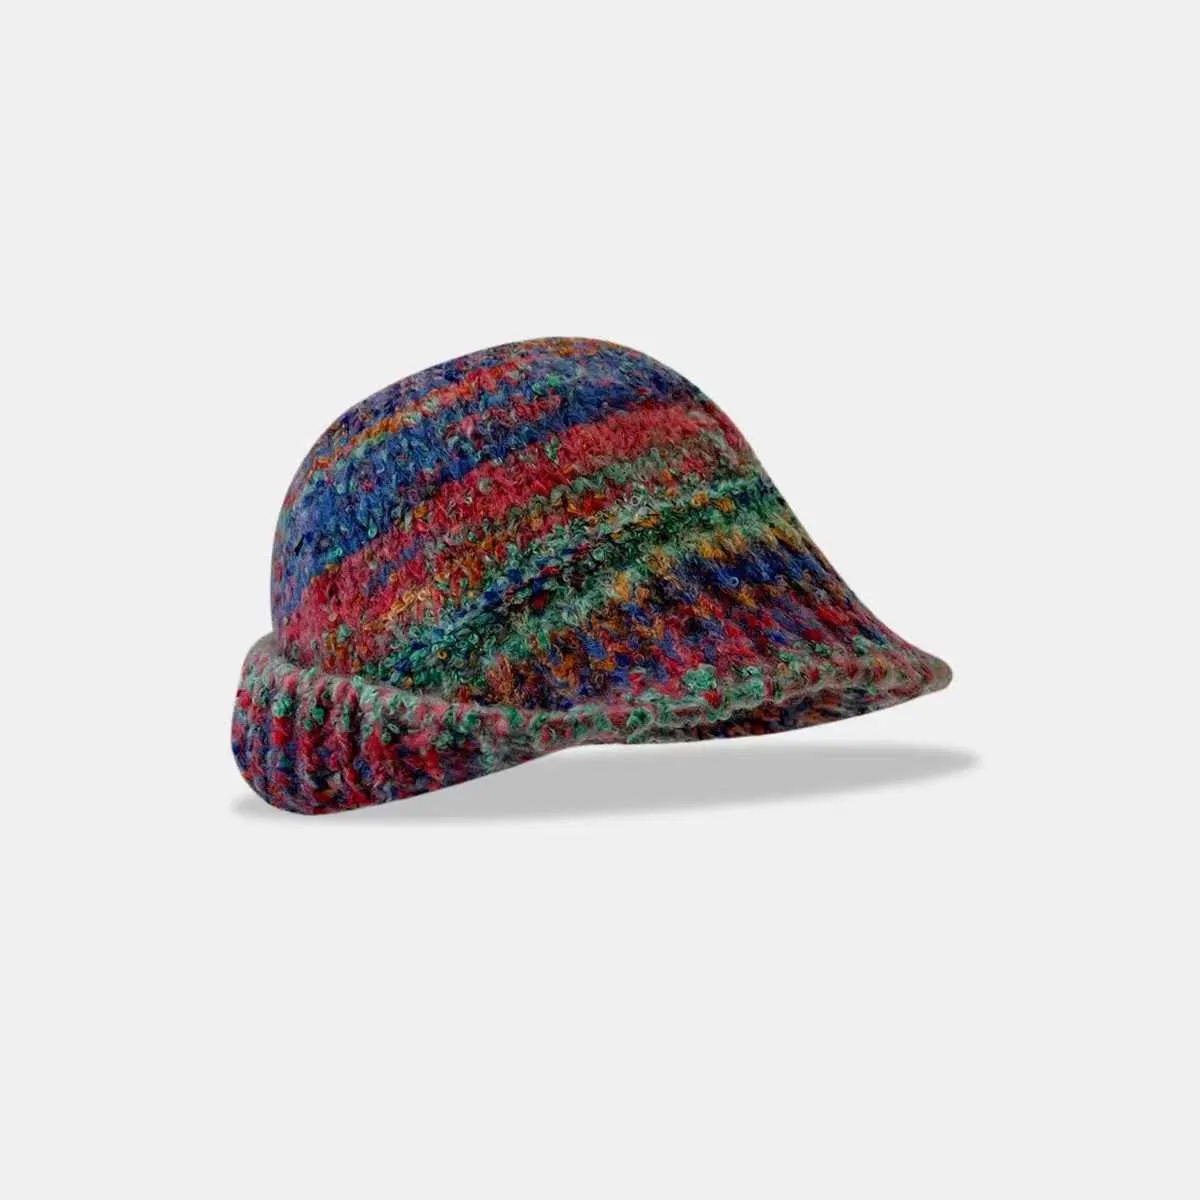 Crowd Design Colorful Gradient Wool Pot Hat for Women in Autumn and Winter Warm Ear Protection Show Face Small Knitted Fisherman Hat 231015